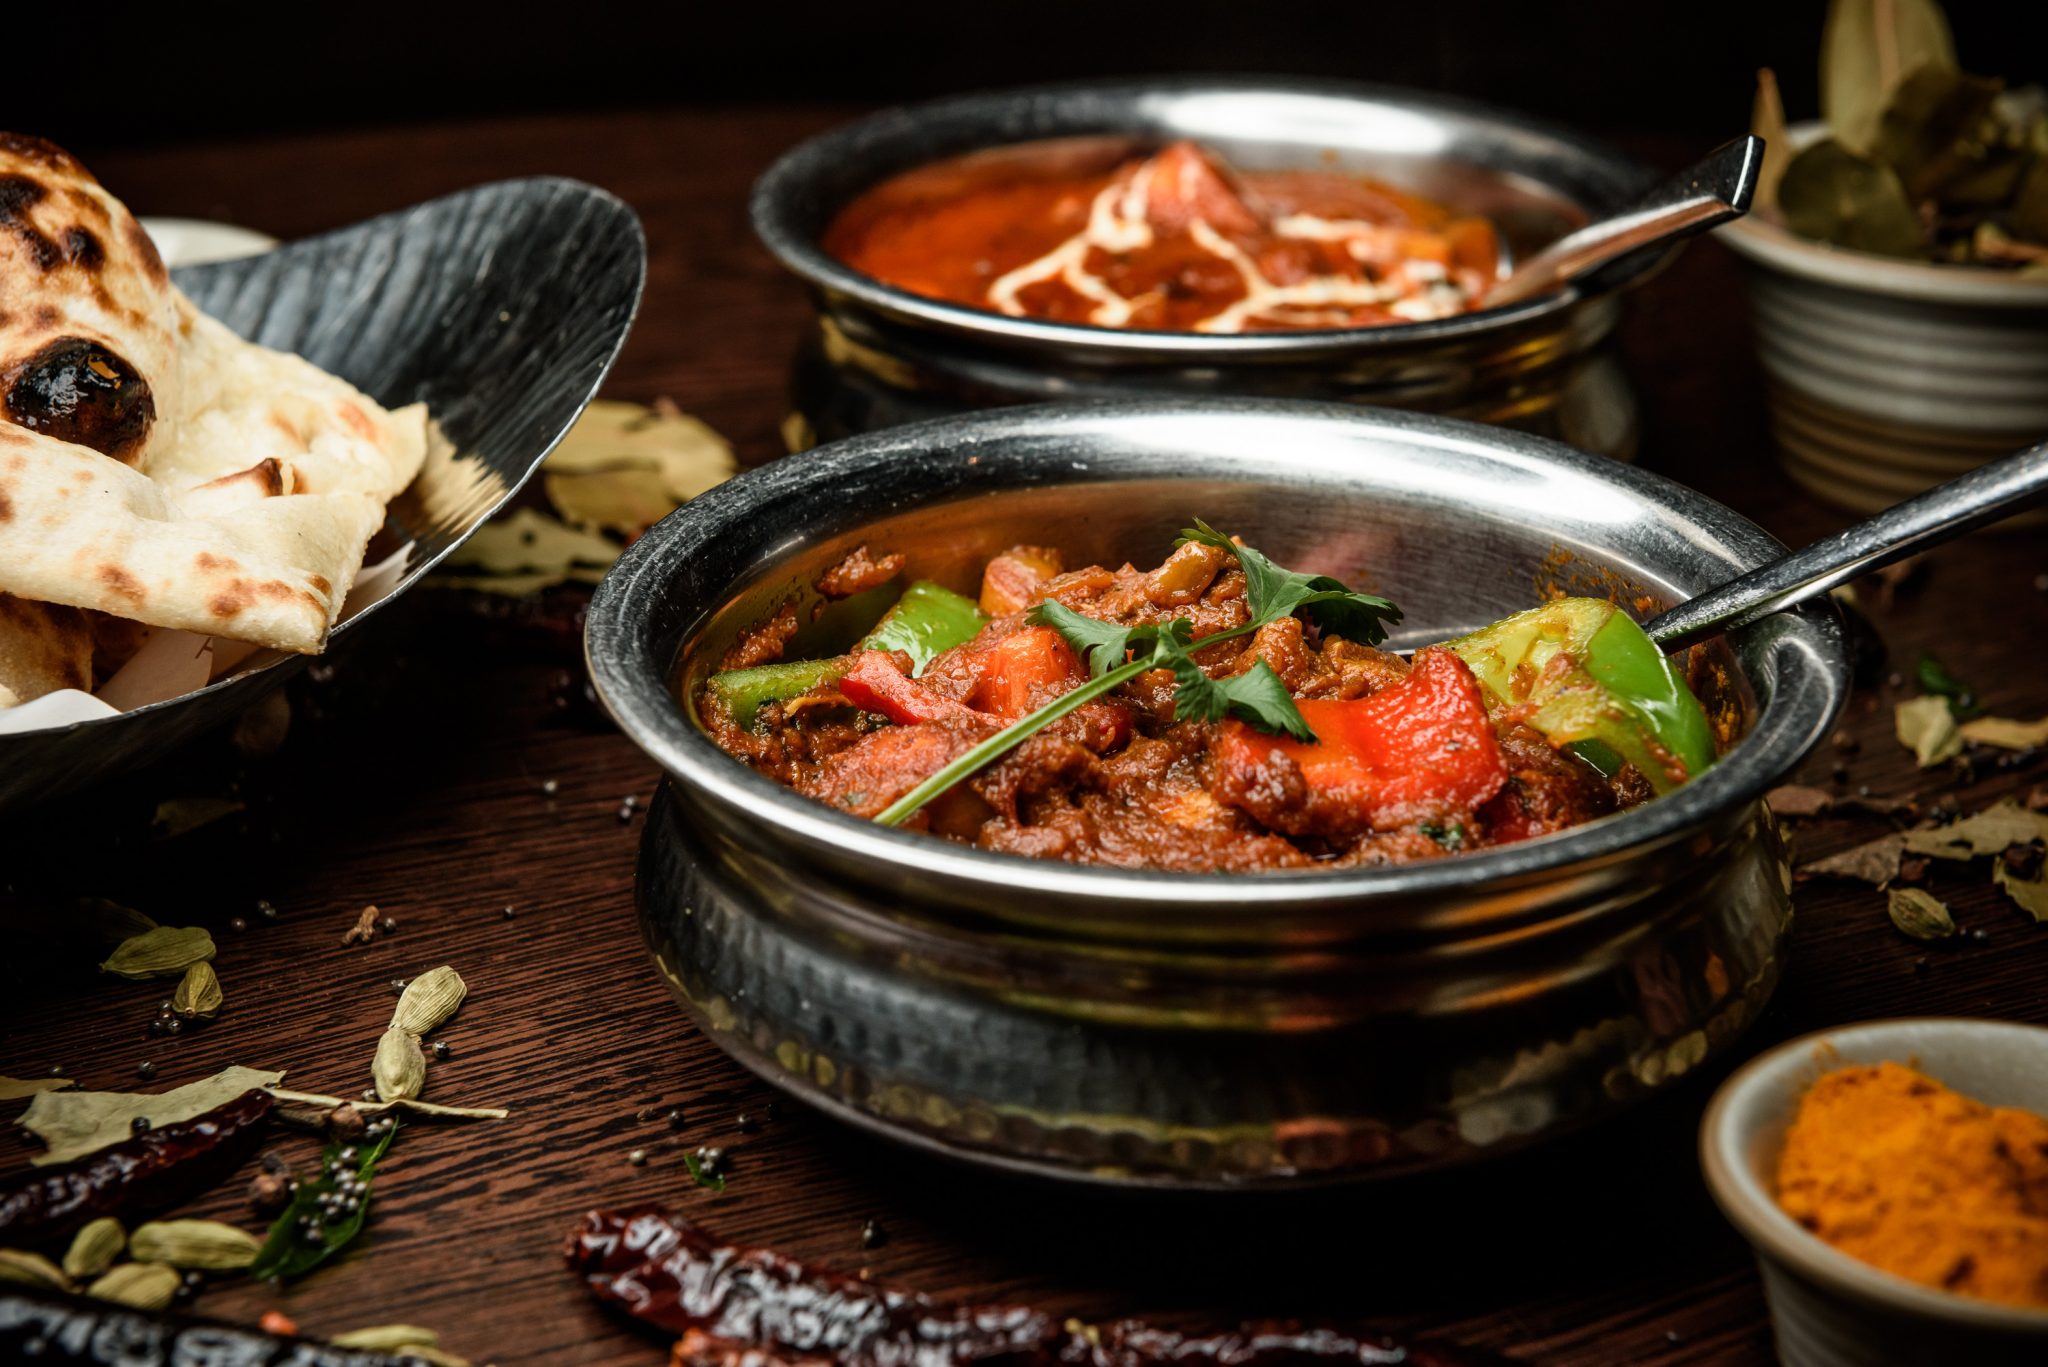 About Us | Authentic Indian Restaurant in York | Jaipur Spice